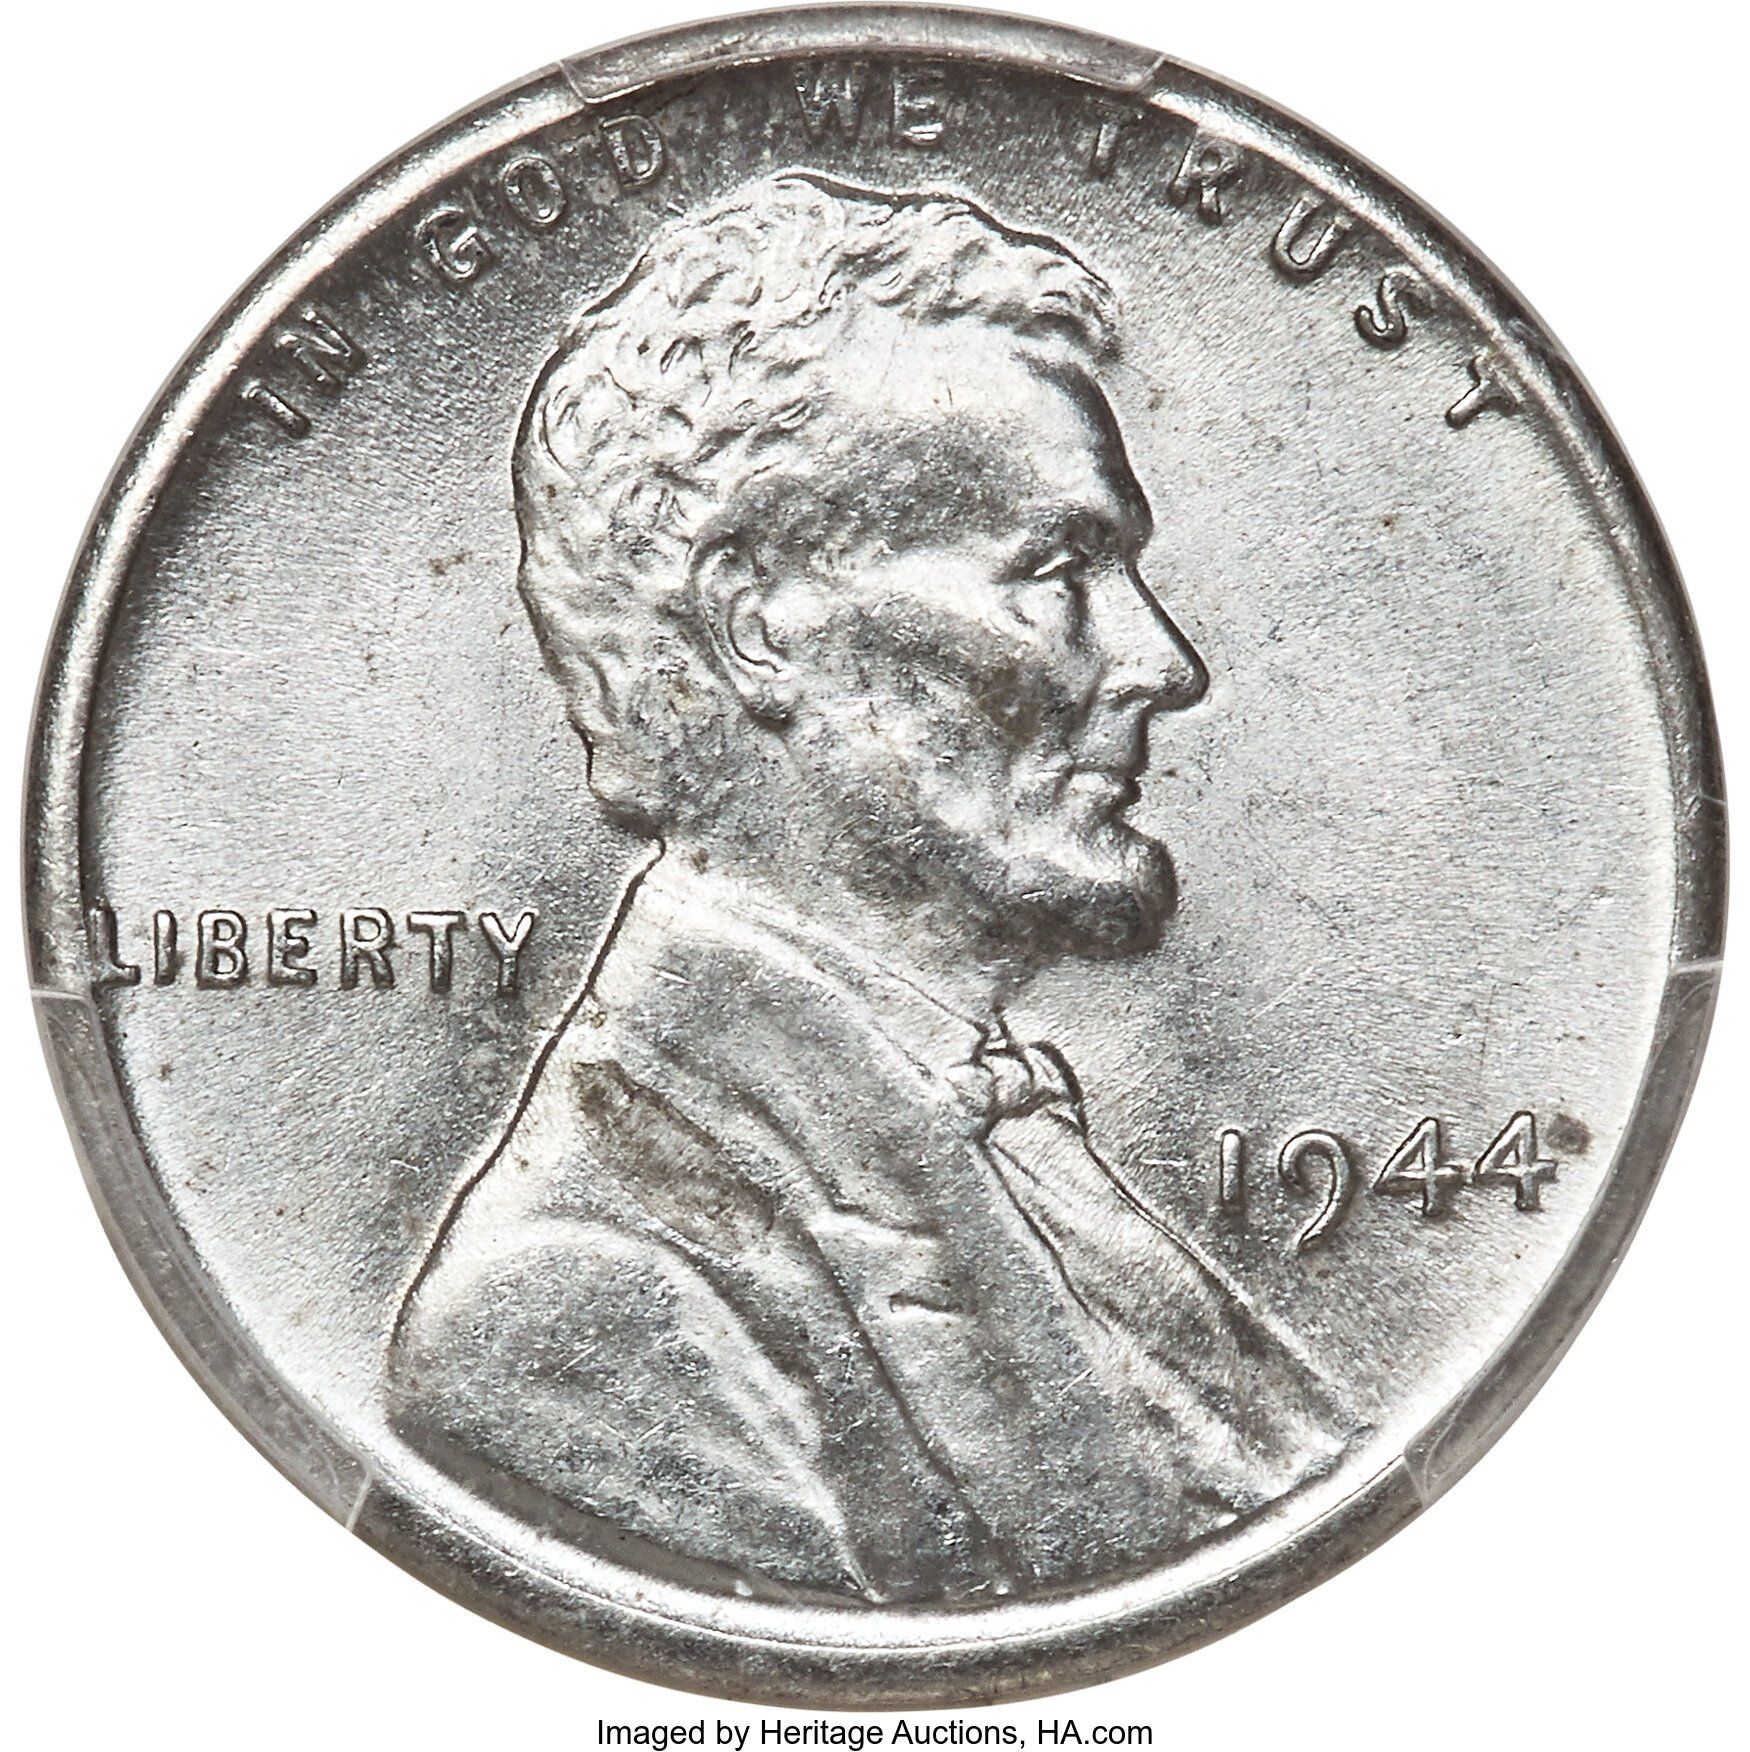 1944 Steel Lincoln Wheat Cent. Imaged by heritage Auctions, HA.com